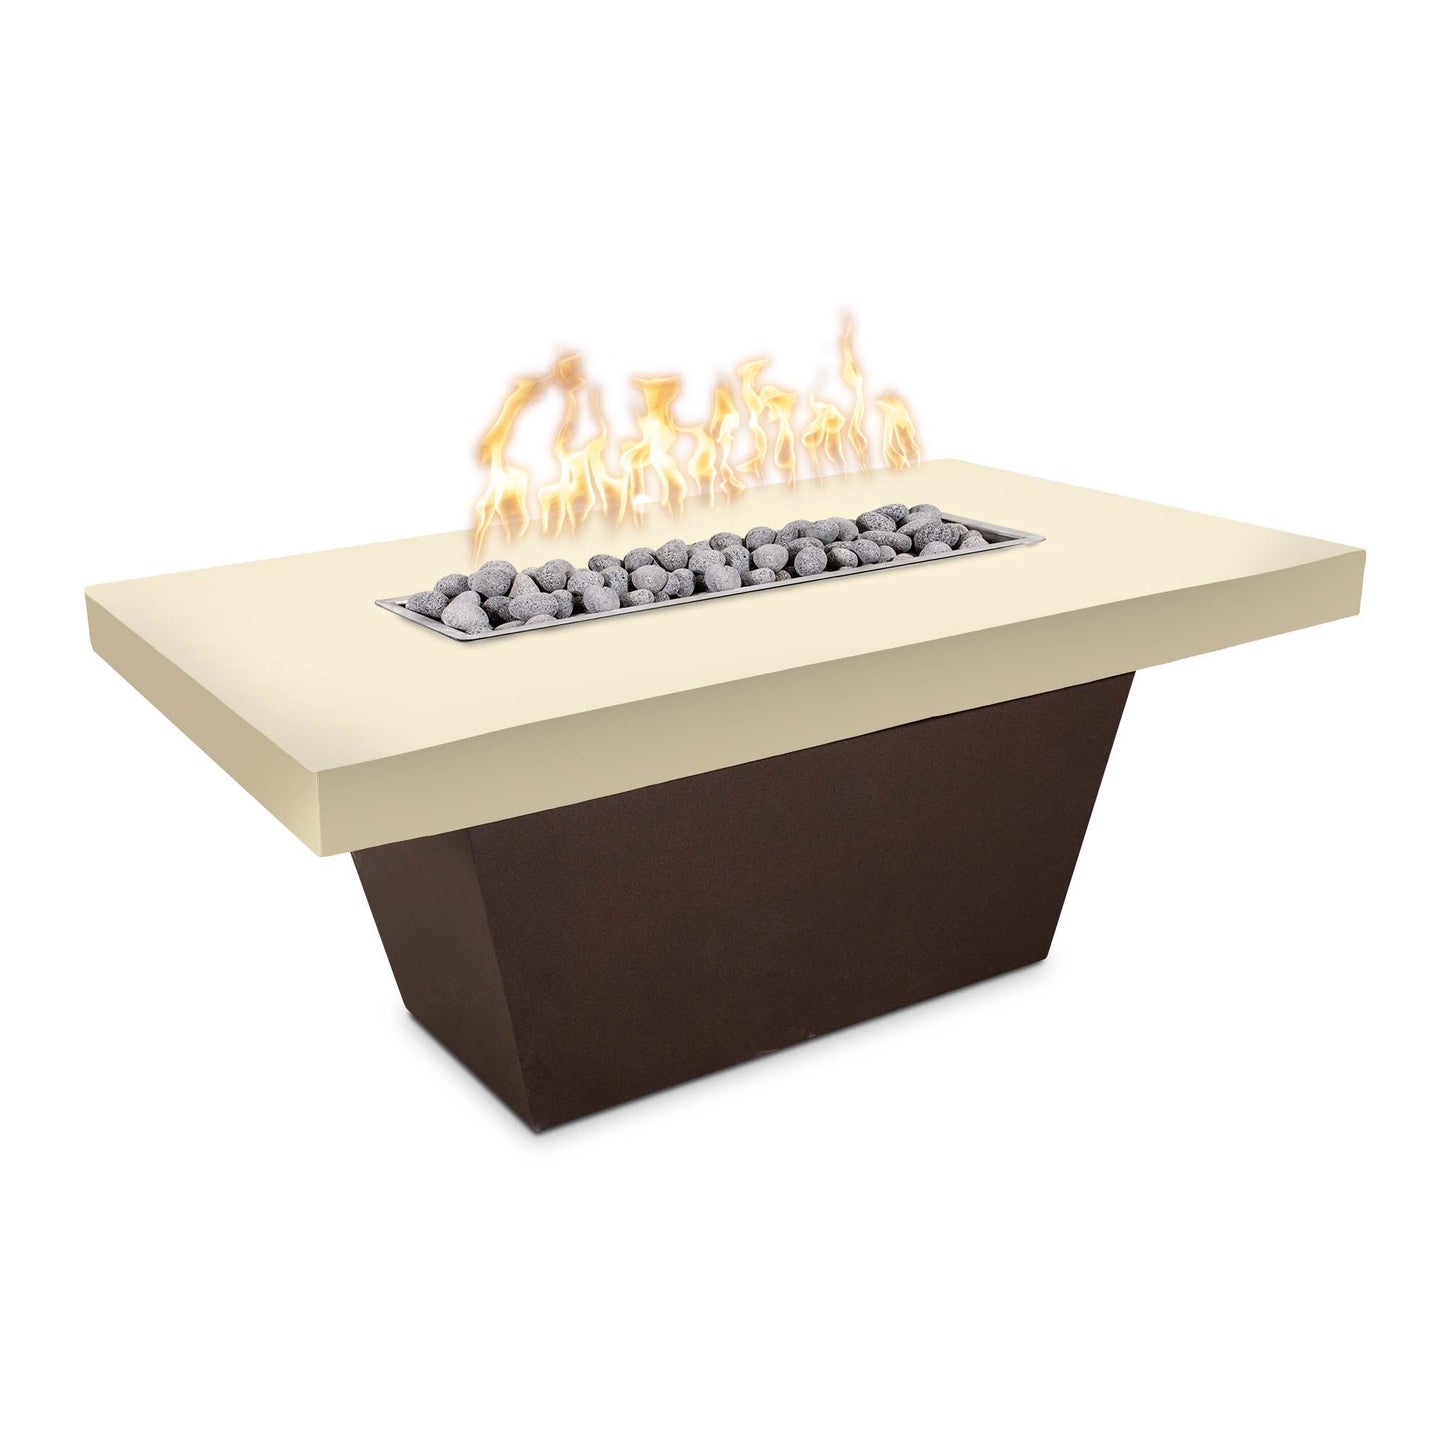 The Outdoor Plus Tacoma 48" Rustic Gray Concrete Top & Copper Vein Powder Coated Base Liquid Propane Fire Table with Match Lit Ignition